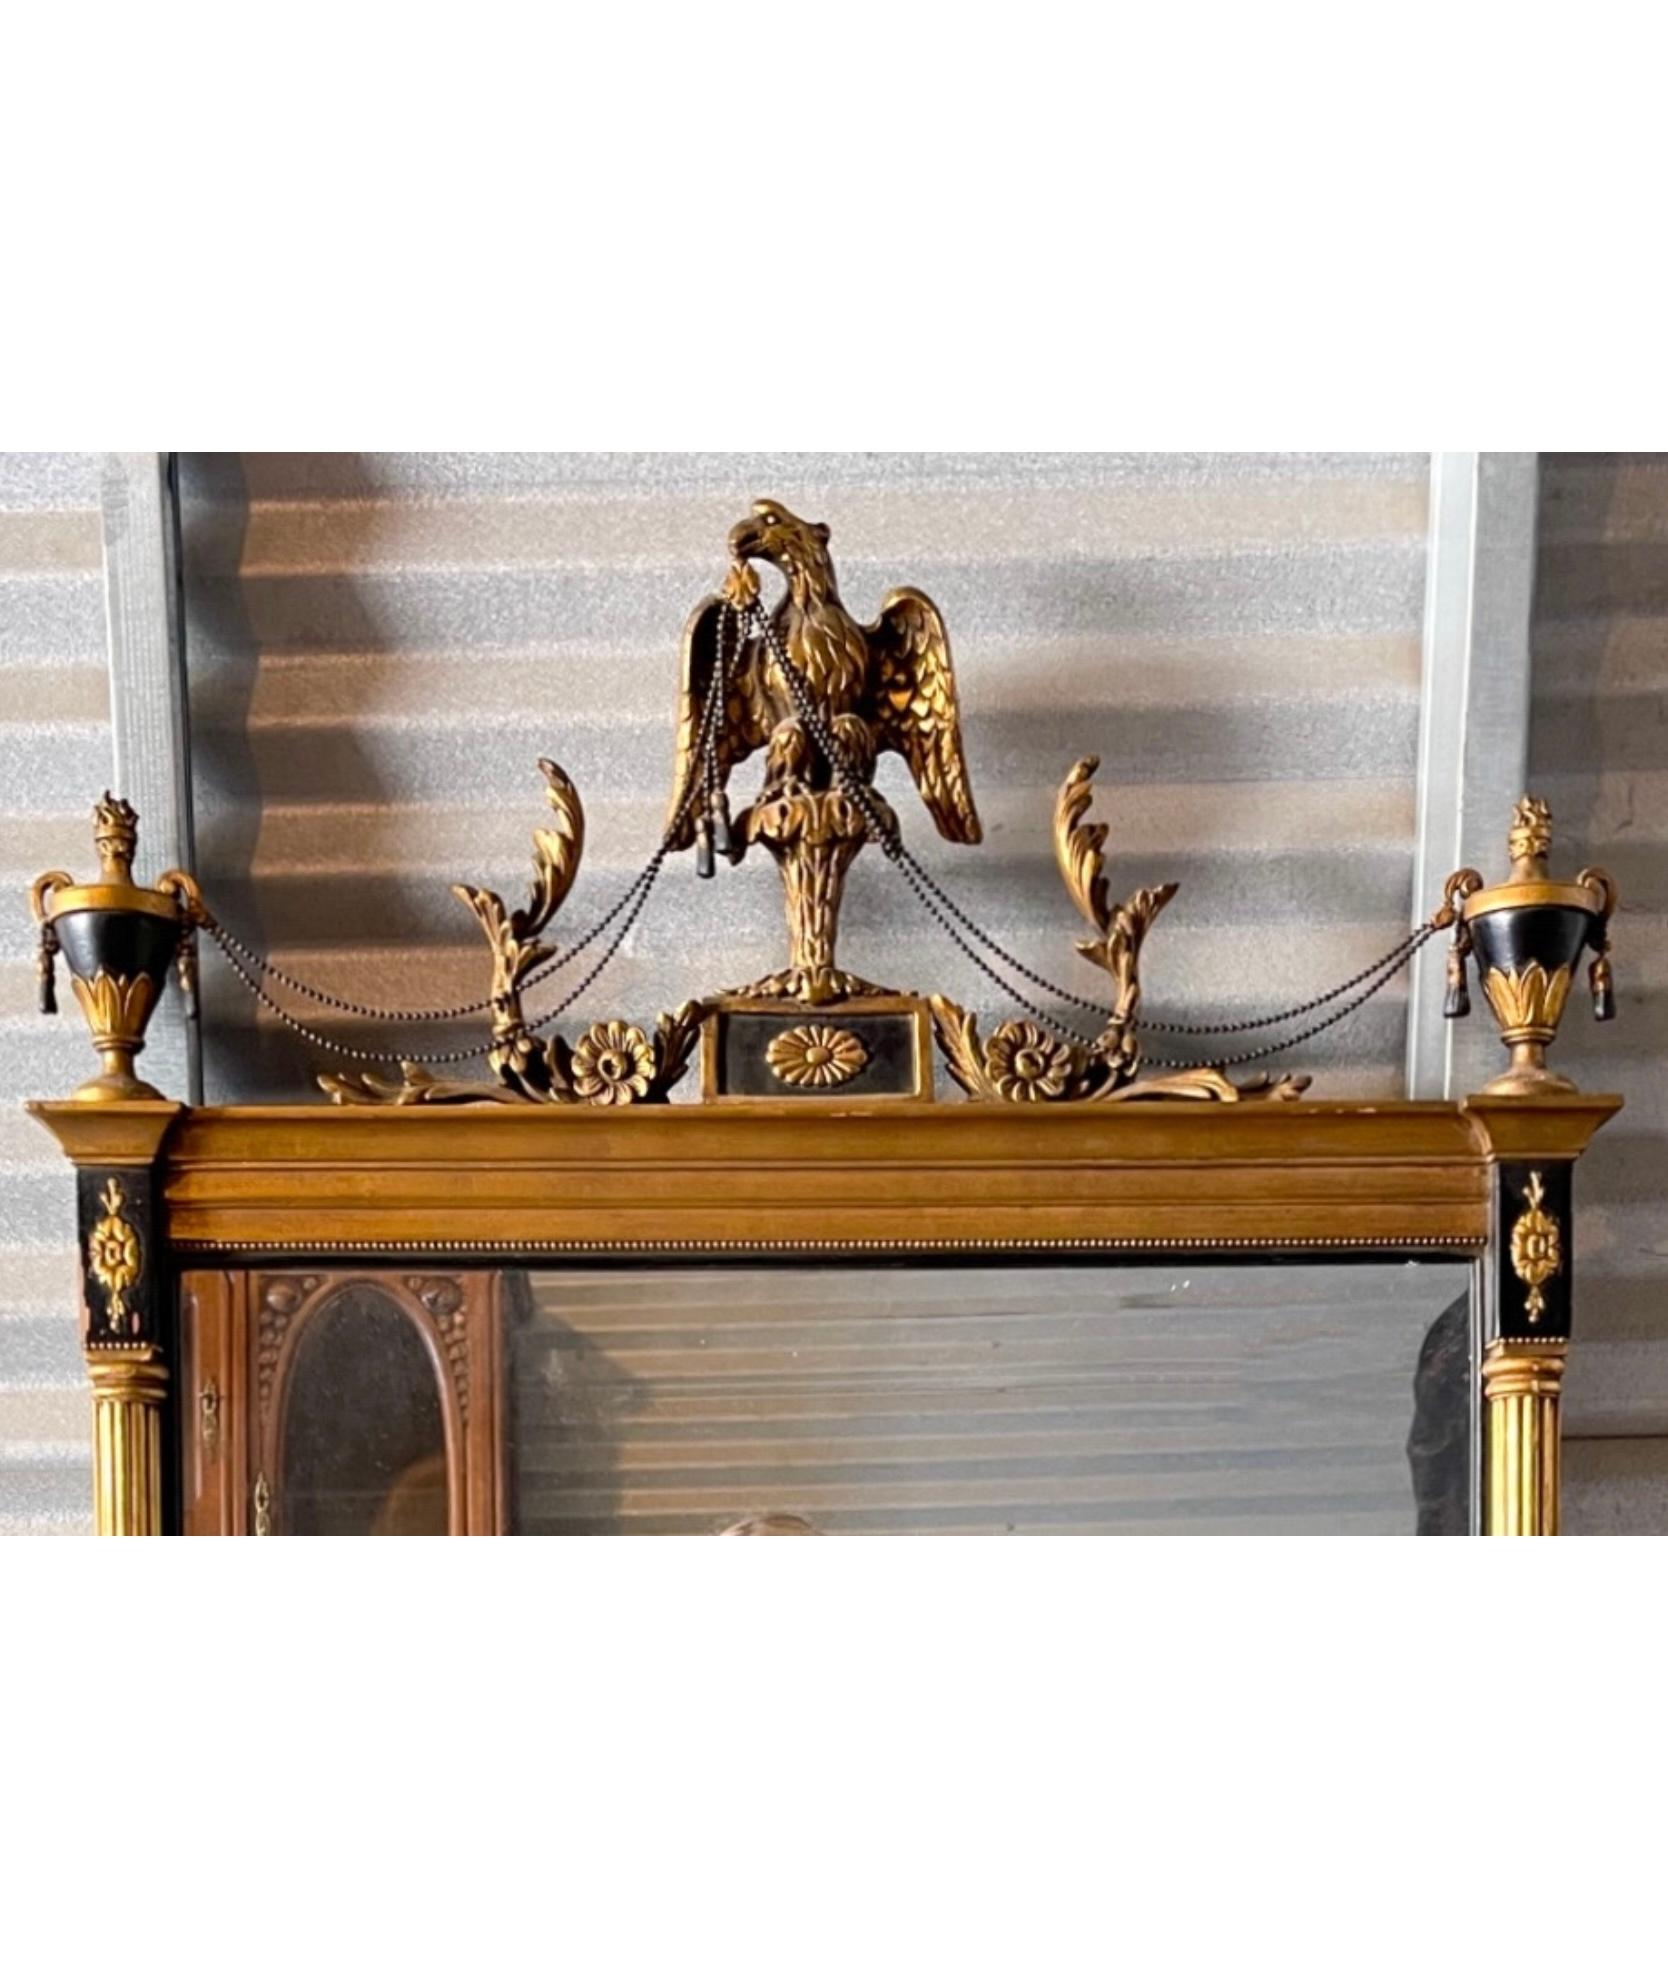 Neoclassical Revival Federal Neo-Classical Style Carved Giltwood Italian Mirror With Urns And Eagle  For Sale